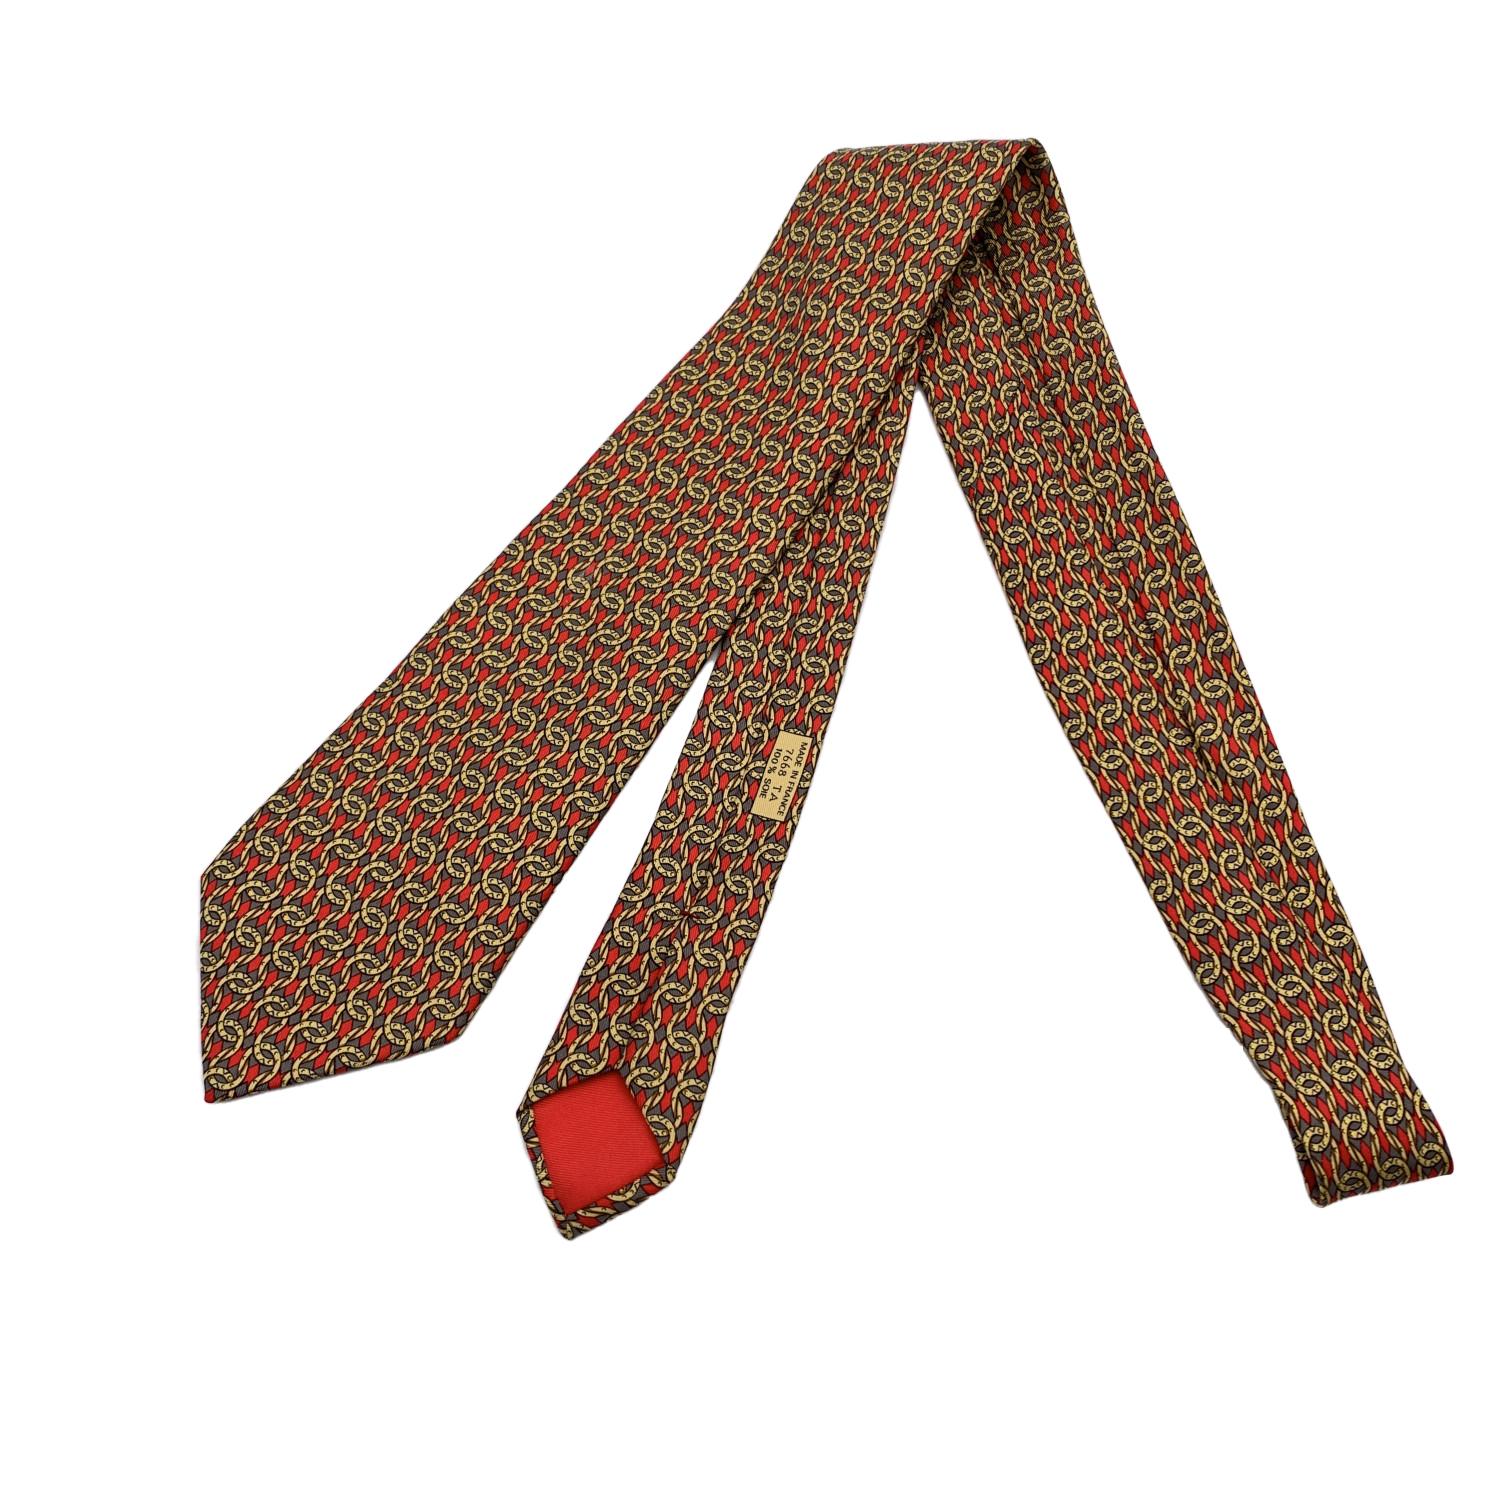 Elegant Hermes Neck Tie,7668 TA, with yellow chain link print on red background. Composition: 100% Silk. Hermes composition tag attached. 'HERMES Paris' with copyright symbol printed on the back. Made in France. Total length: 59 inches - 149.8 cm.